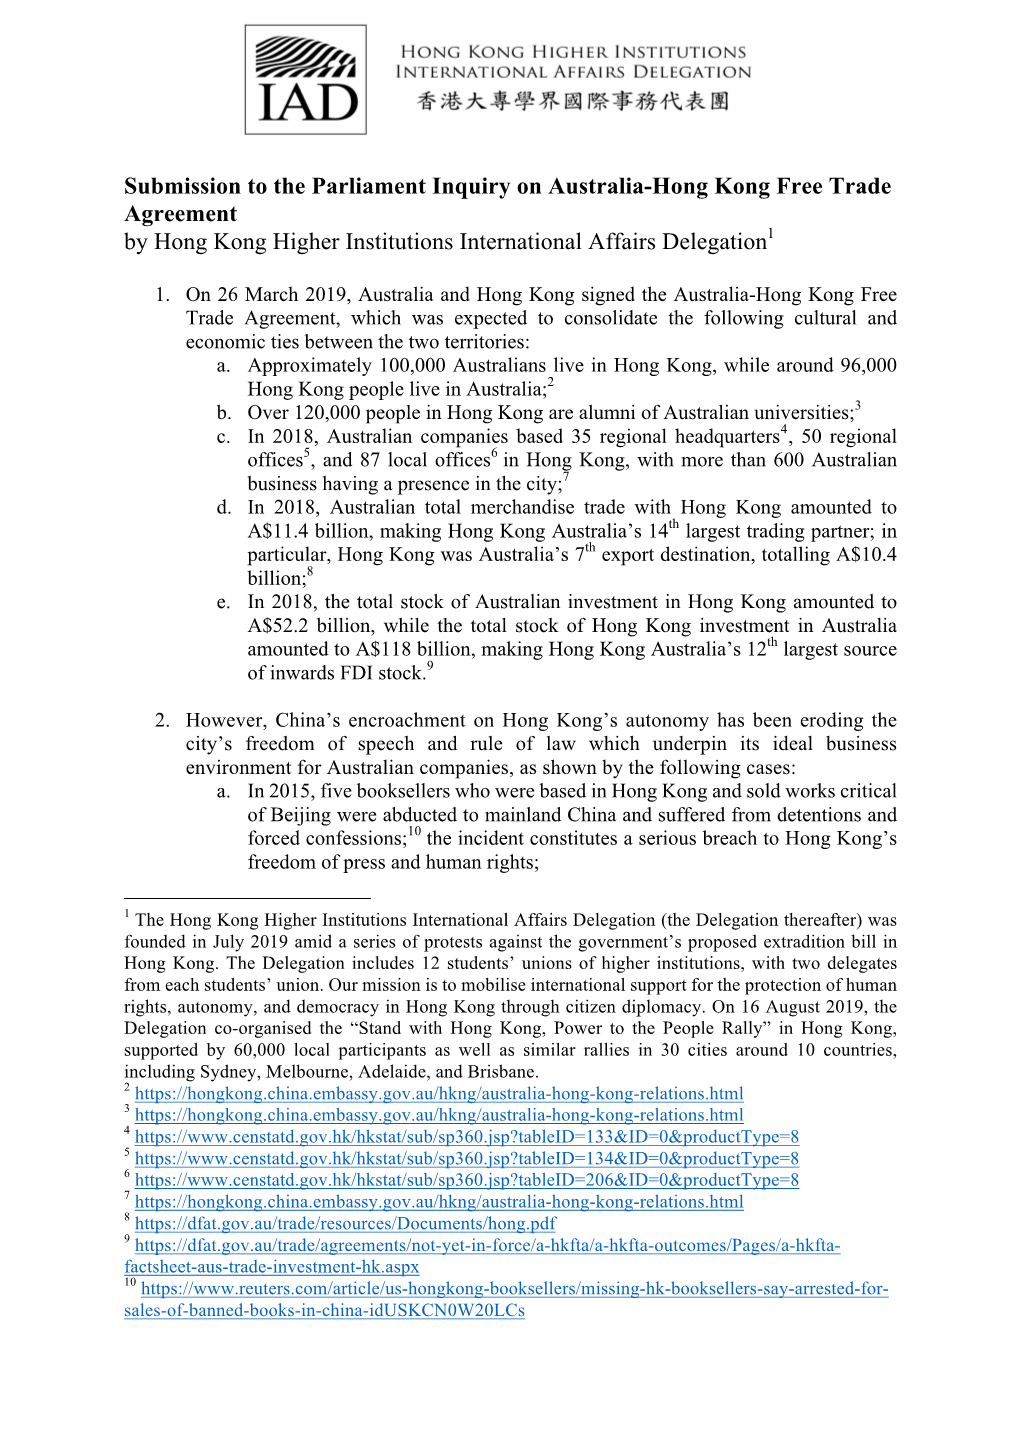 Submission to the Parliament Inquiry on Australia-Hong Kong Free Trade Agreement by Hong Kong Higher Institutions International Affairs Delegation1